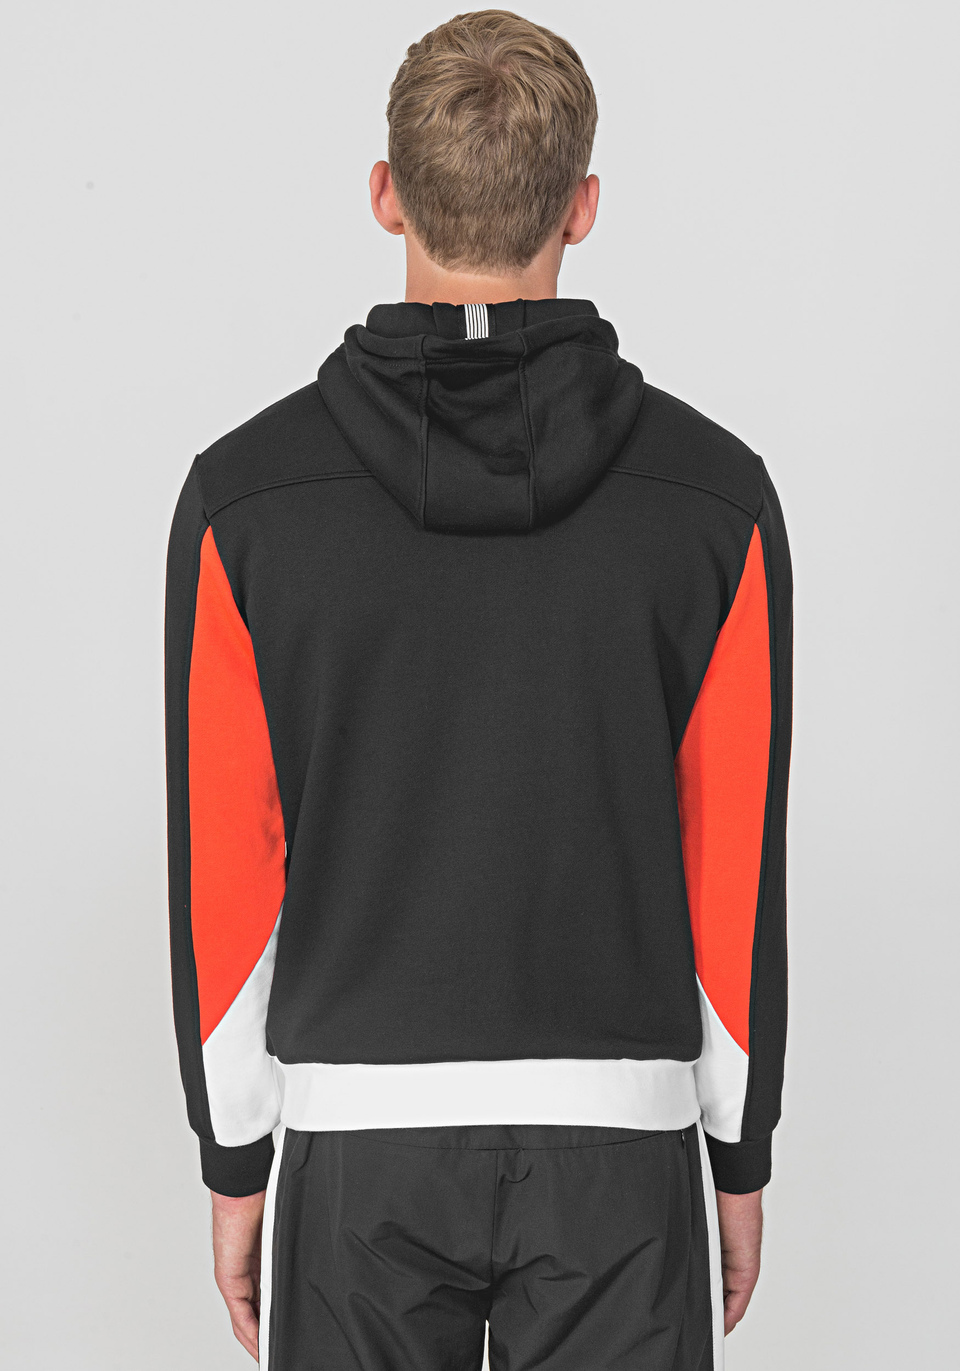 SWEATSHIRT WITH ASYMMETRICAL CONTRASTS AND CONCEALED POCKETS - Antony Morato Online Shop